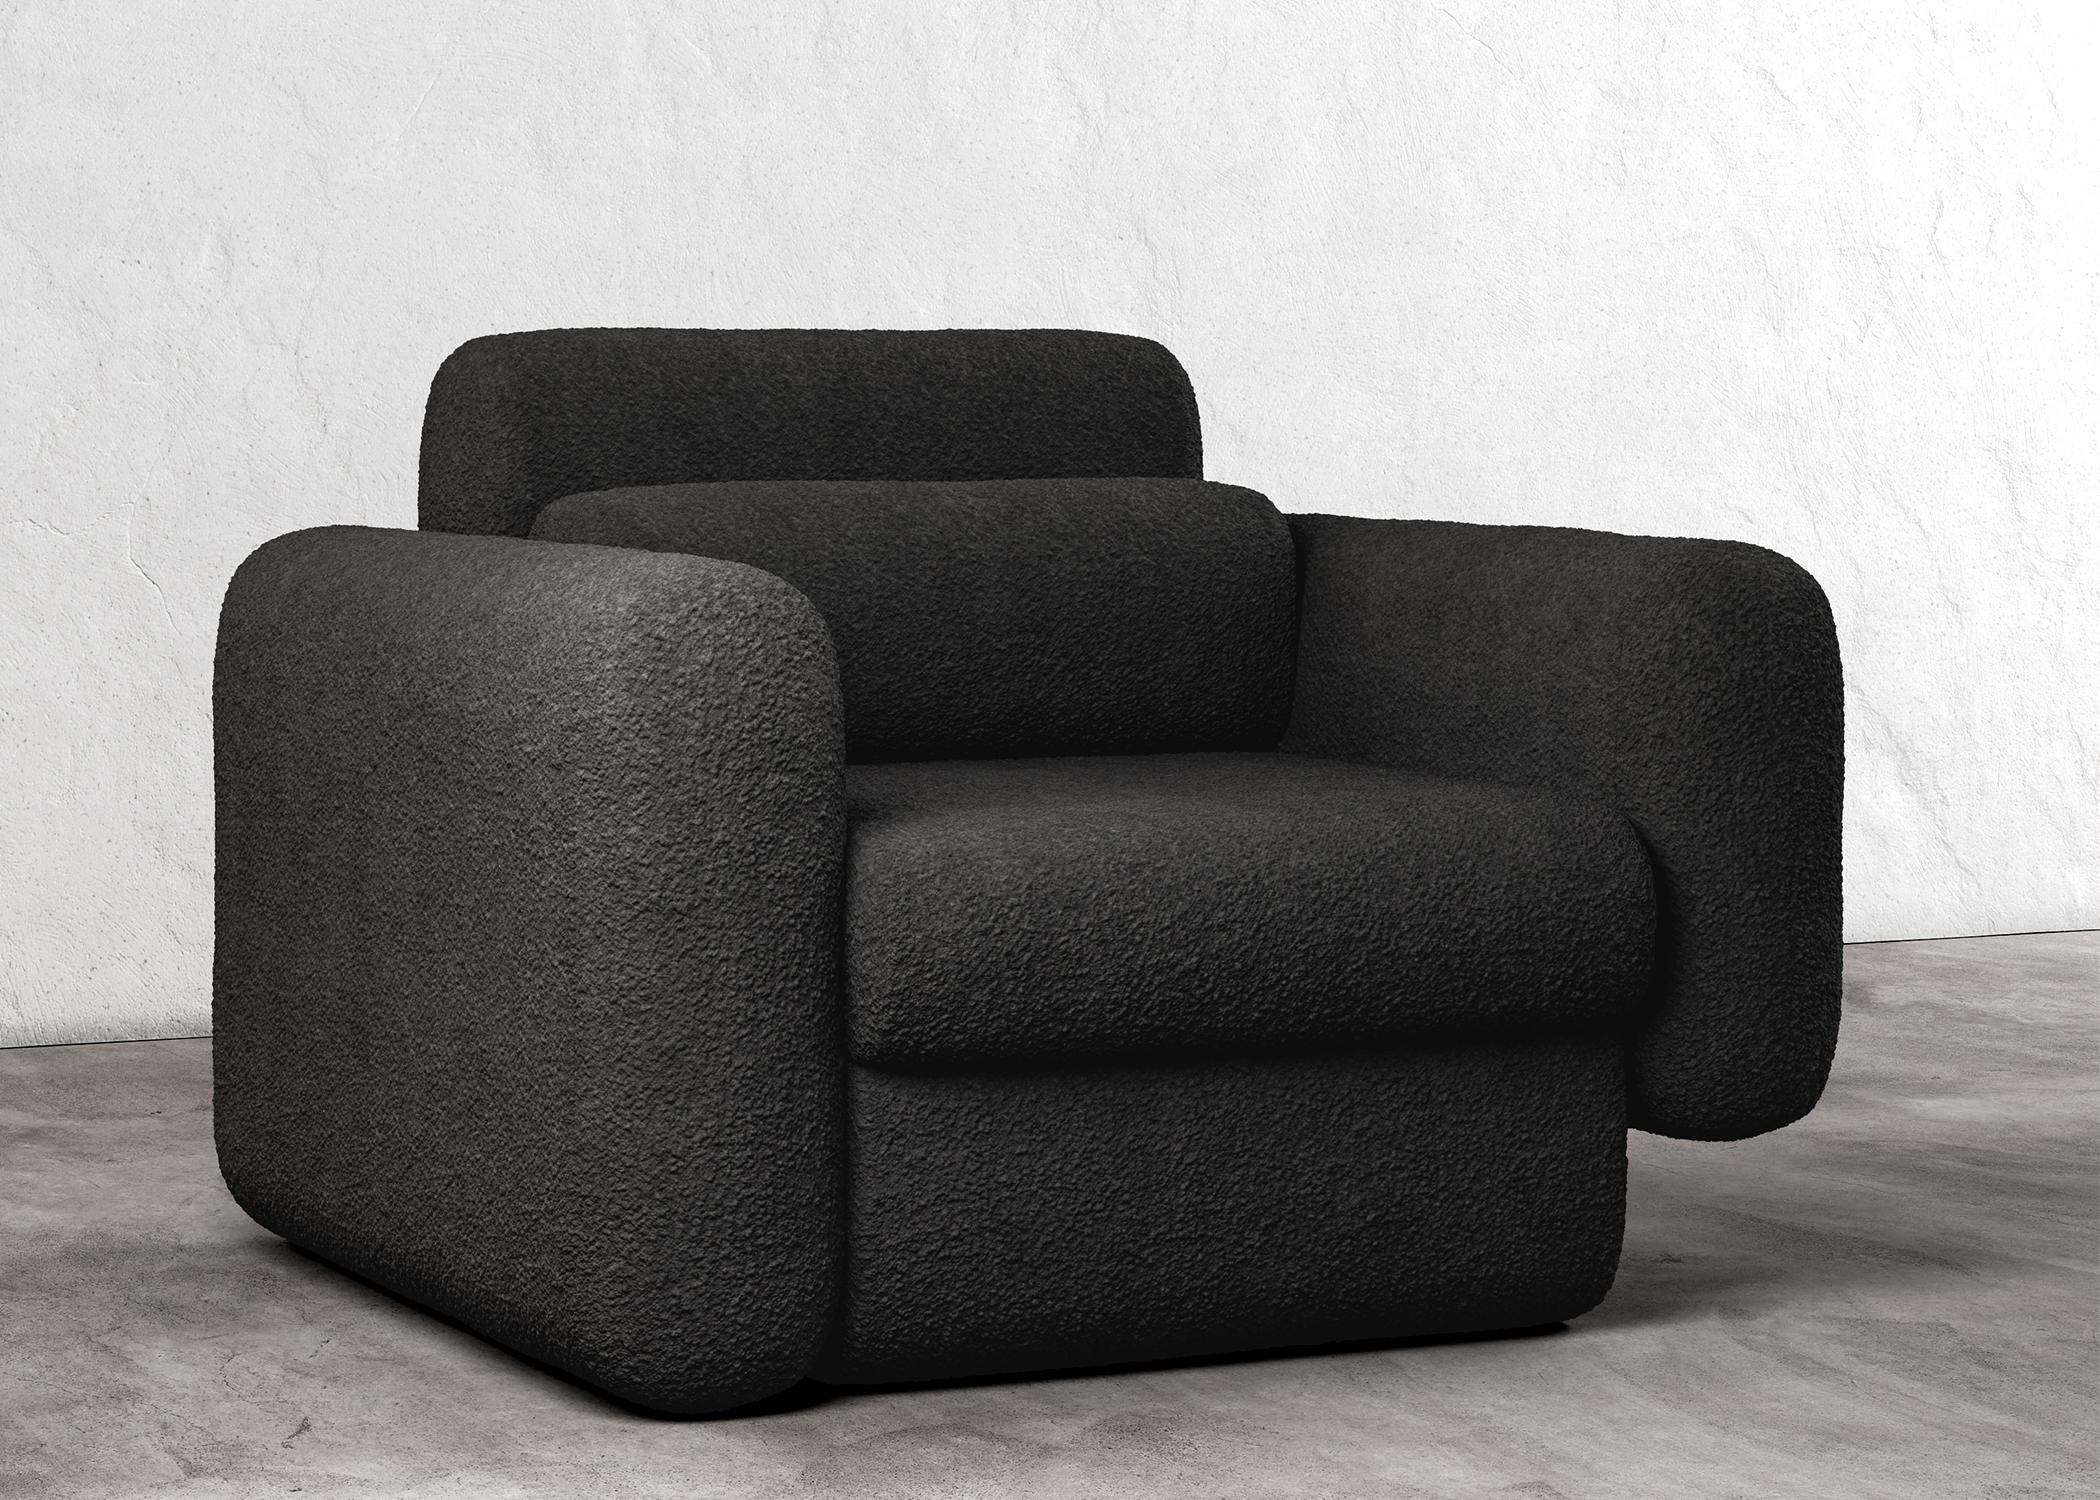 American ASYM CHAIR - Modern Asymmetrical Sectional Chair in Black Boucle For Sale